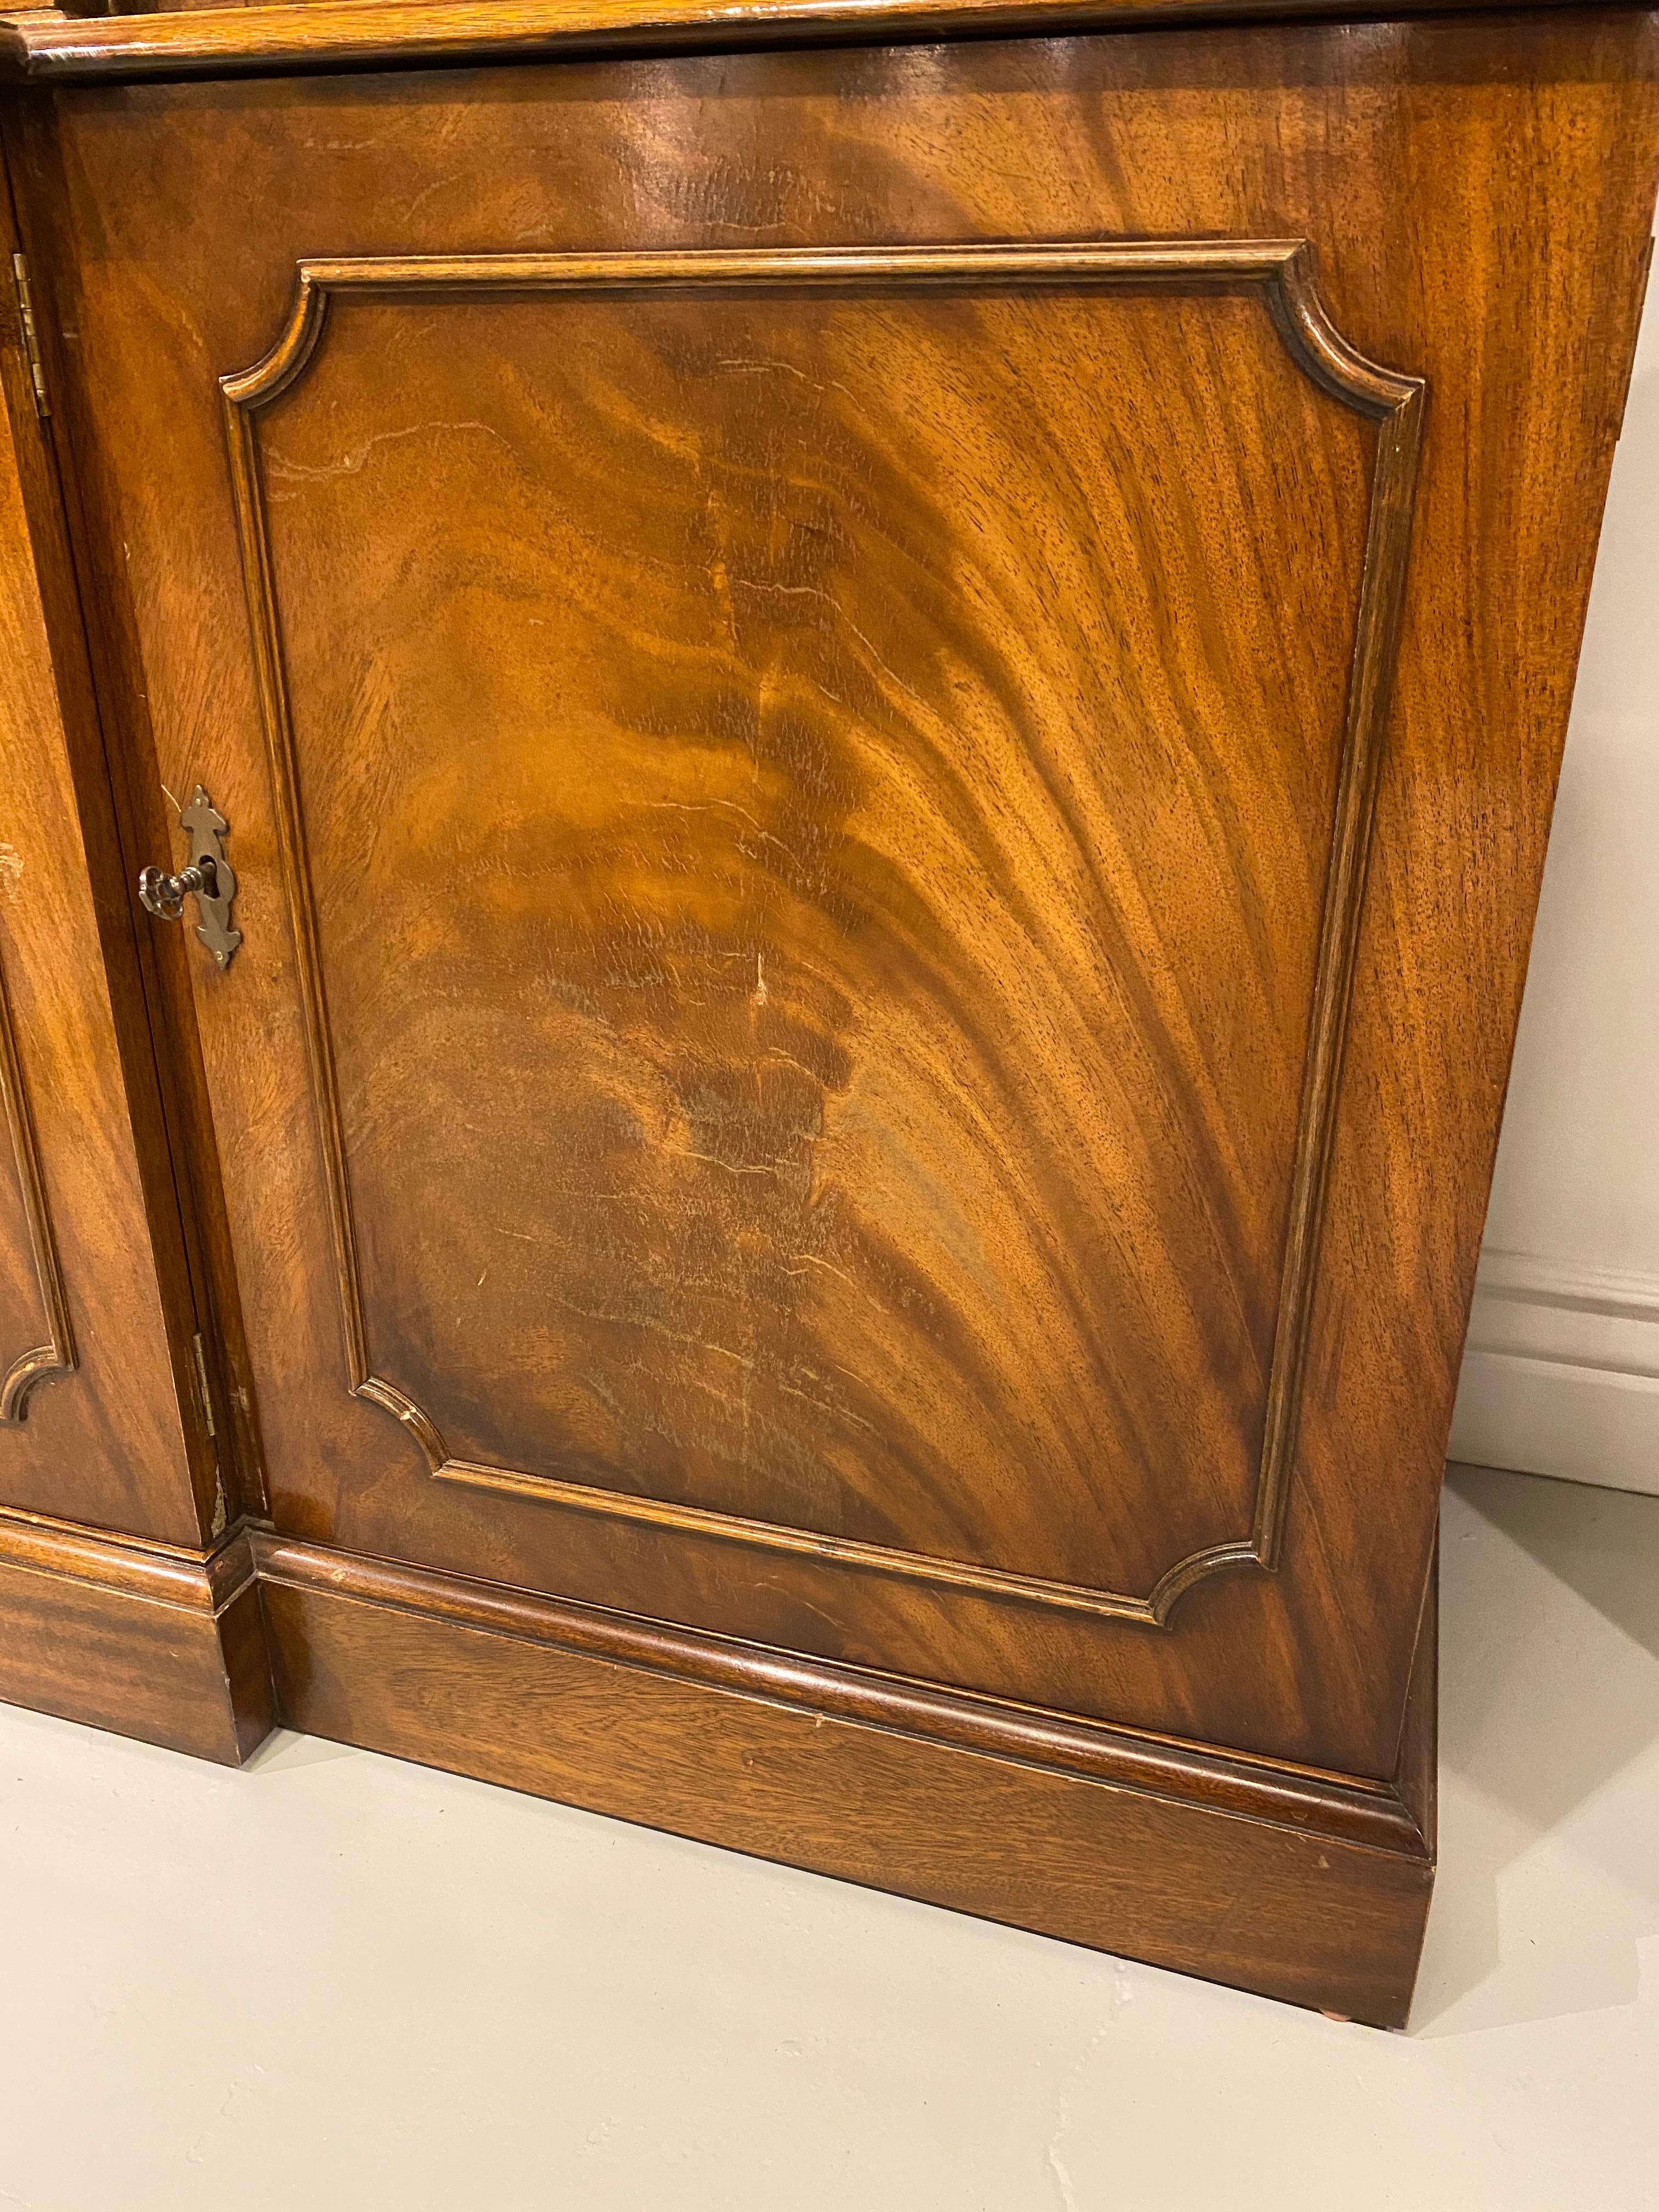 Breakfront Bookcase Georgian Style Mahogany, Made in England 4 Glazed Doors In Good Condition For Sale In Toronto, CA